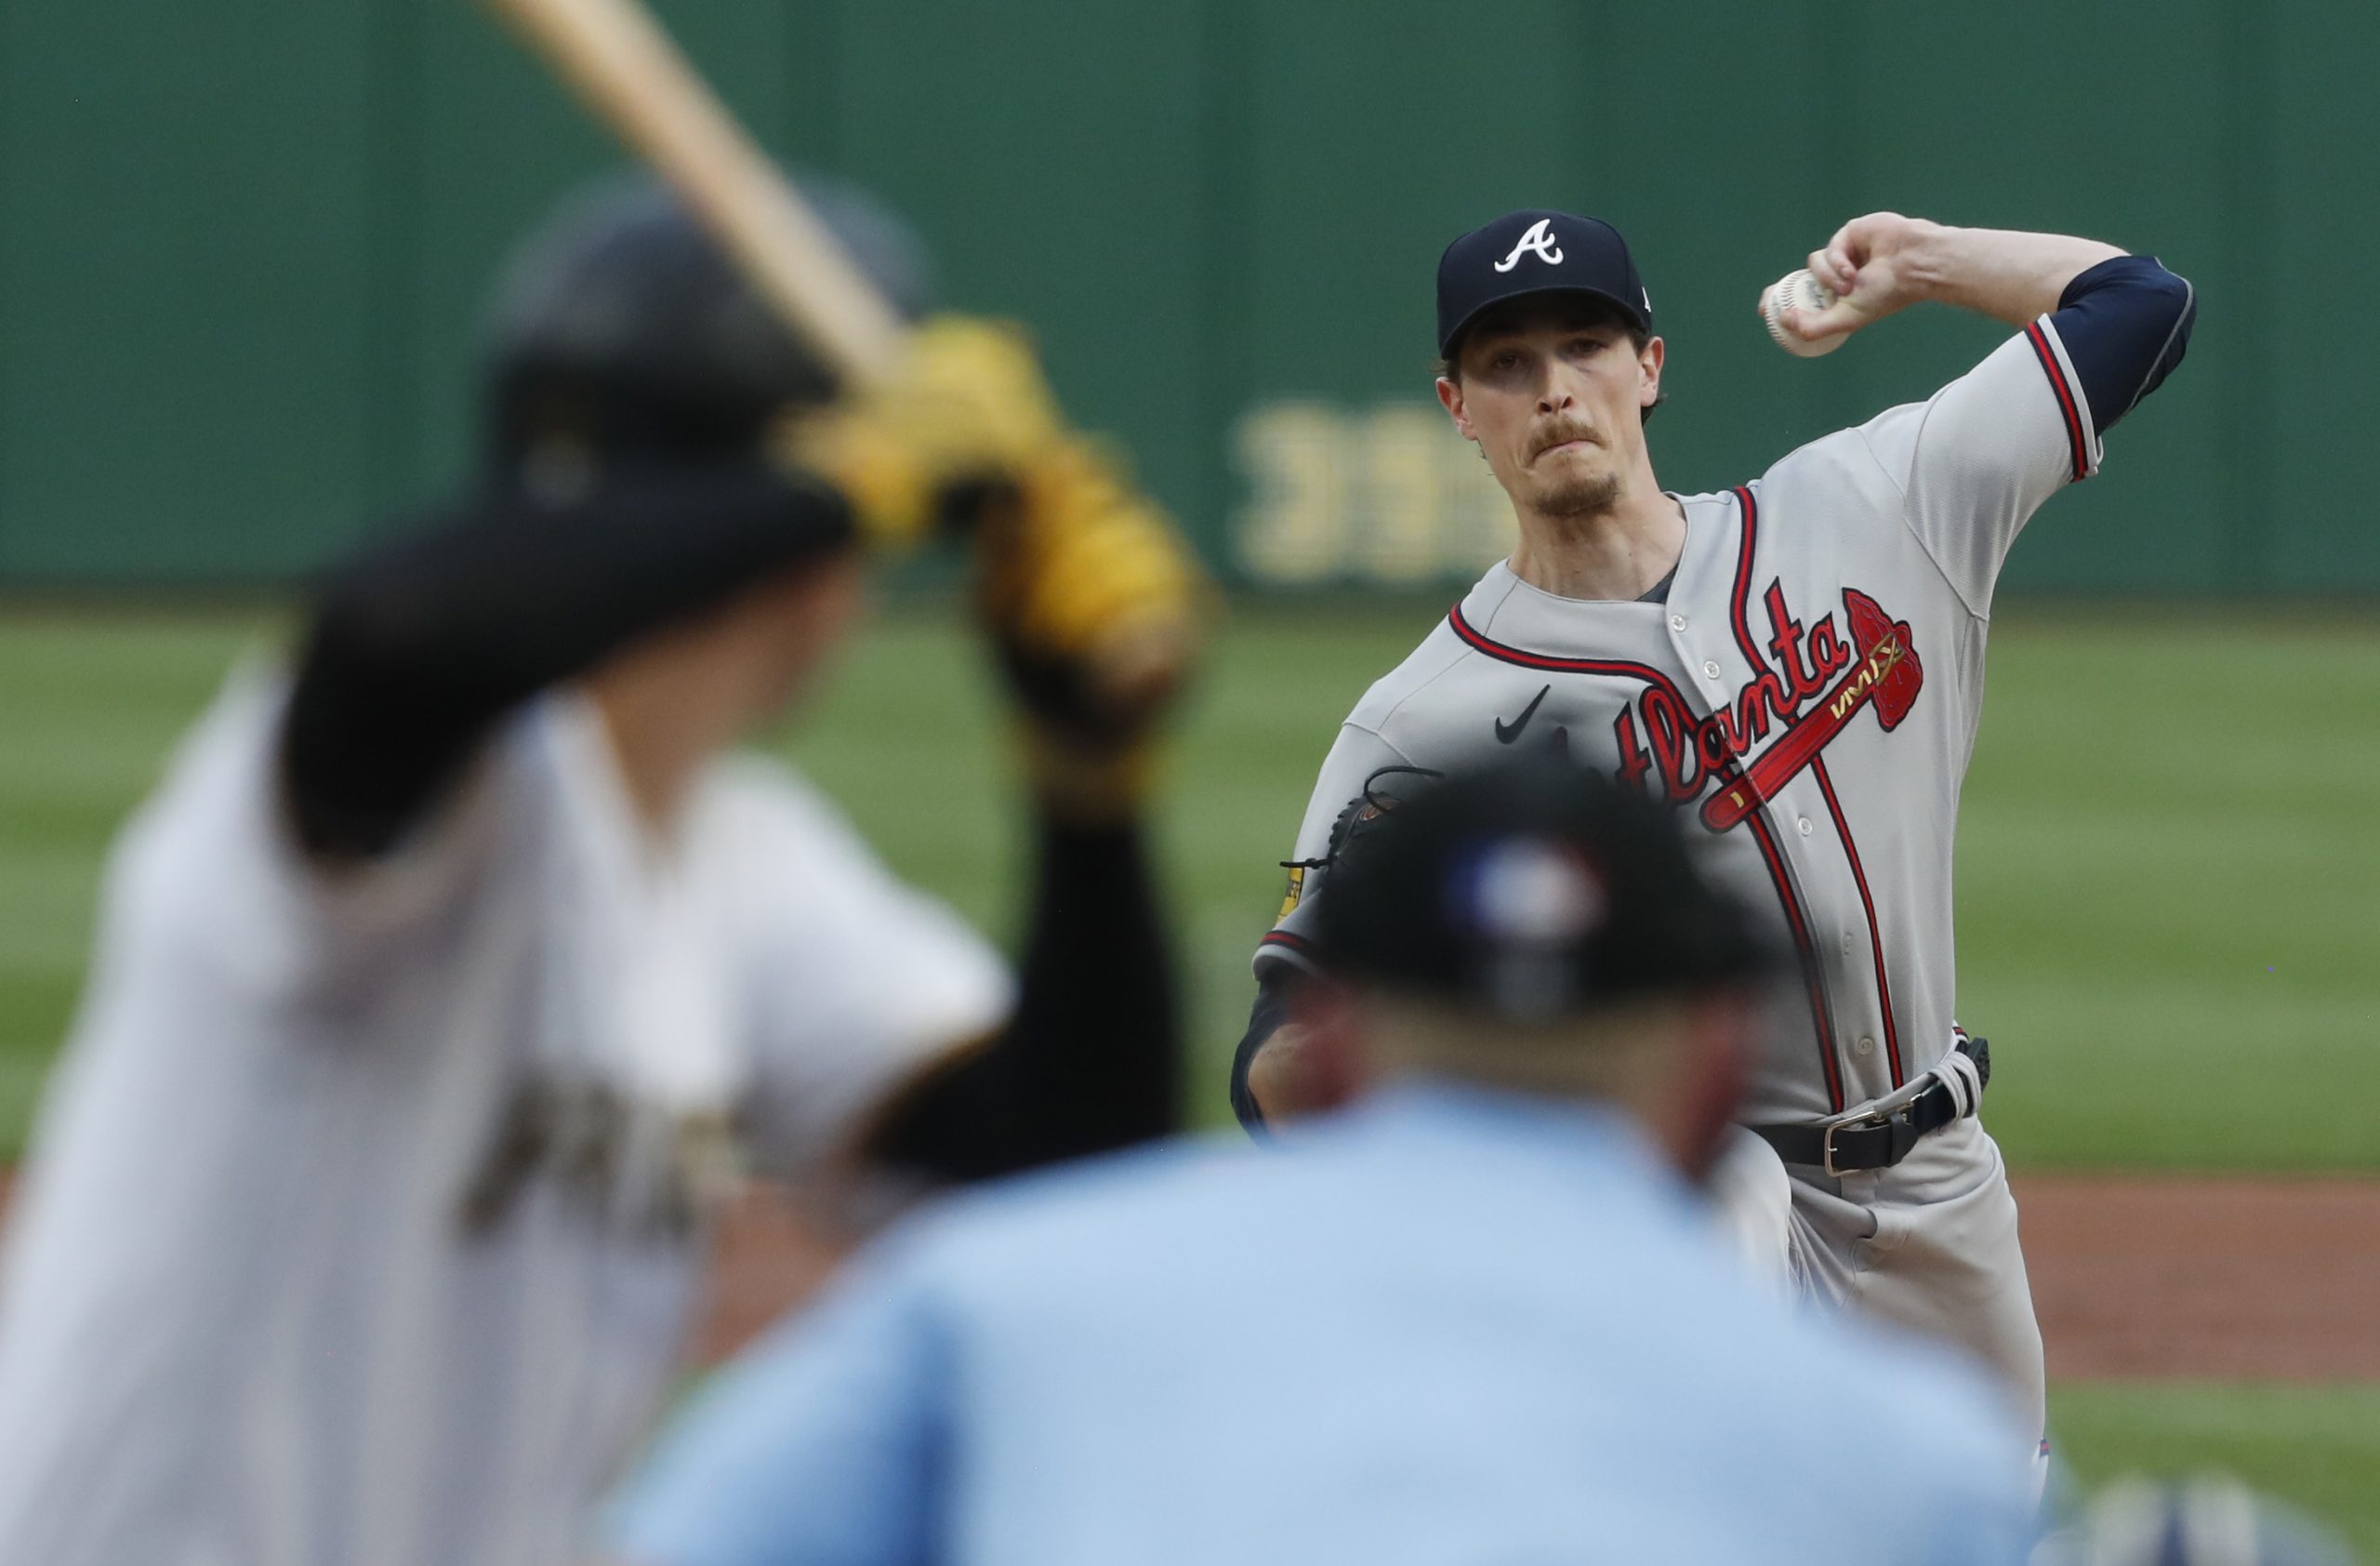 Atlanta Braves to start Max Fried in Game 1 of National League